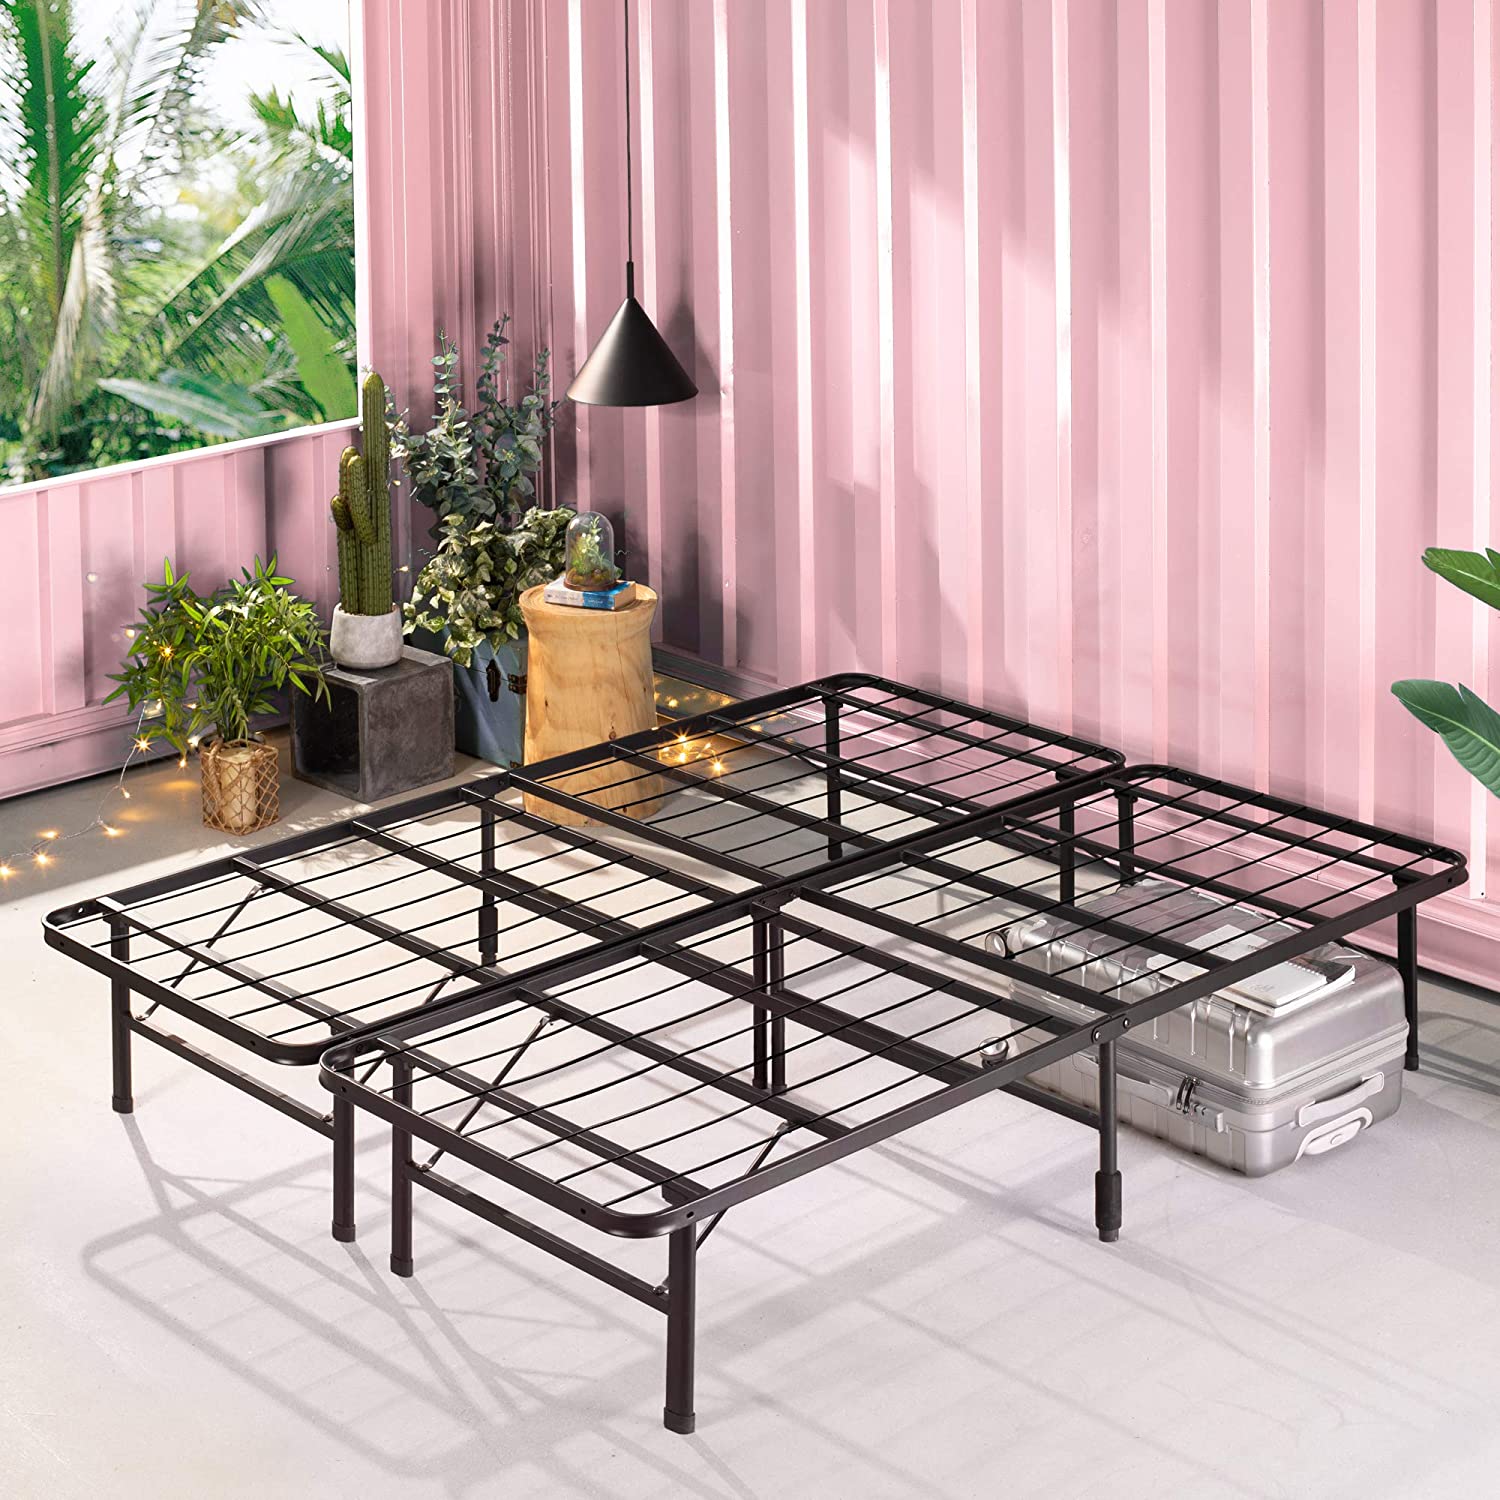 The Best Bed Frames January 2022, Queen Bed Frame That Doesn T Squeak